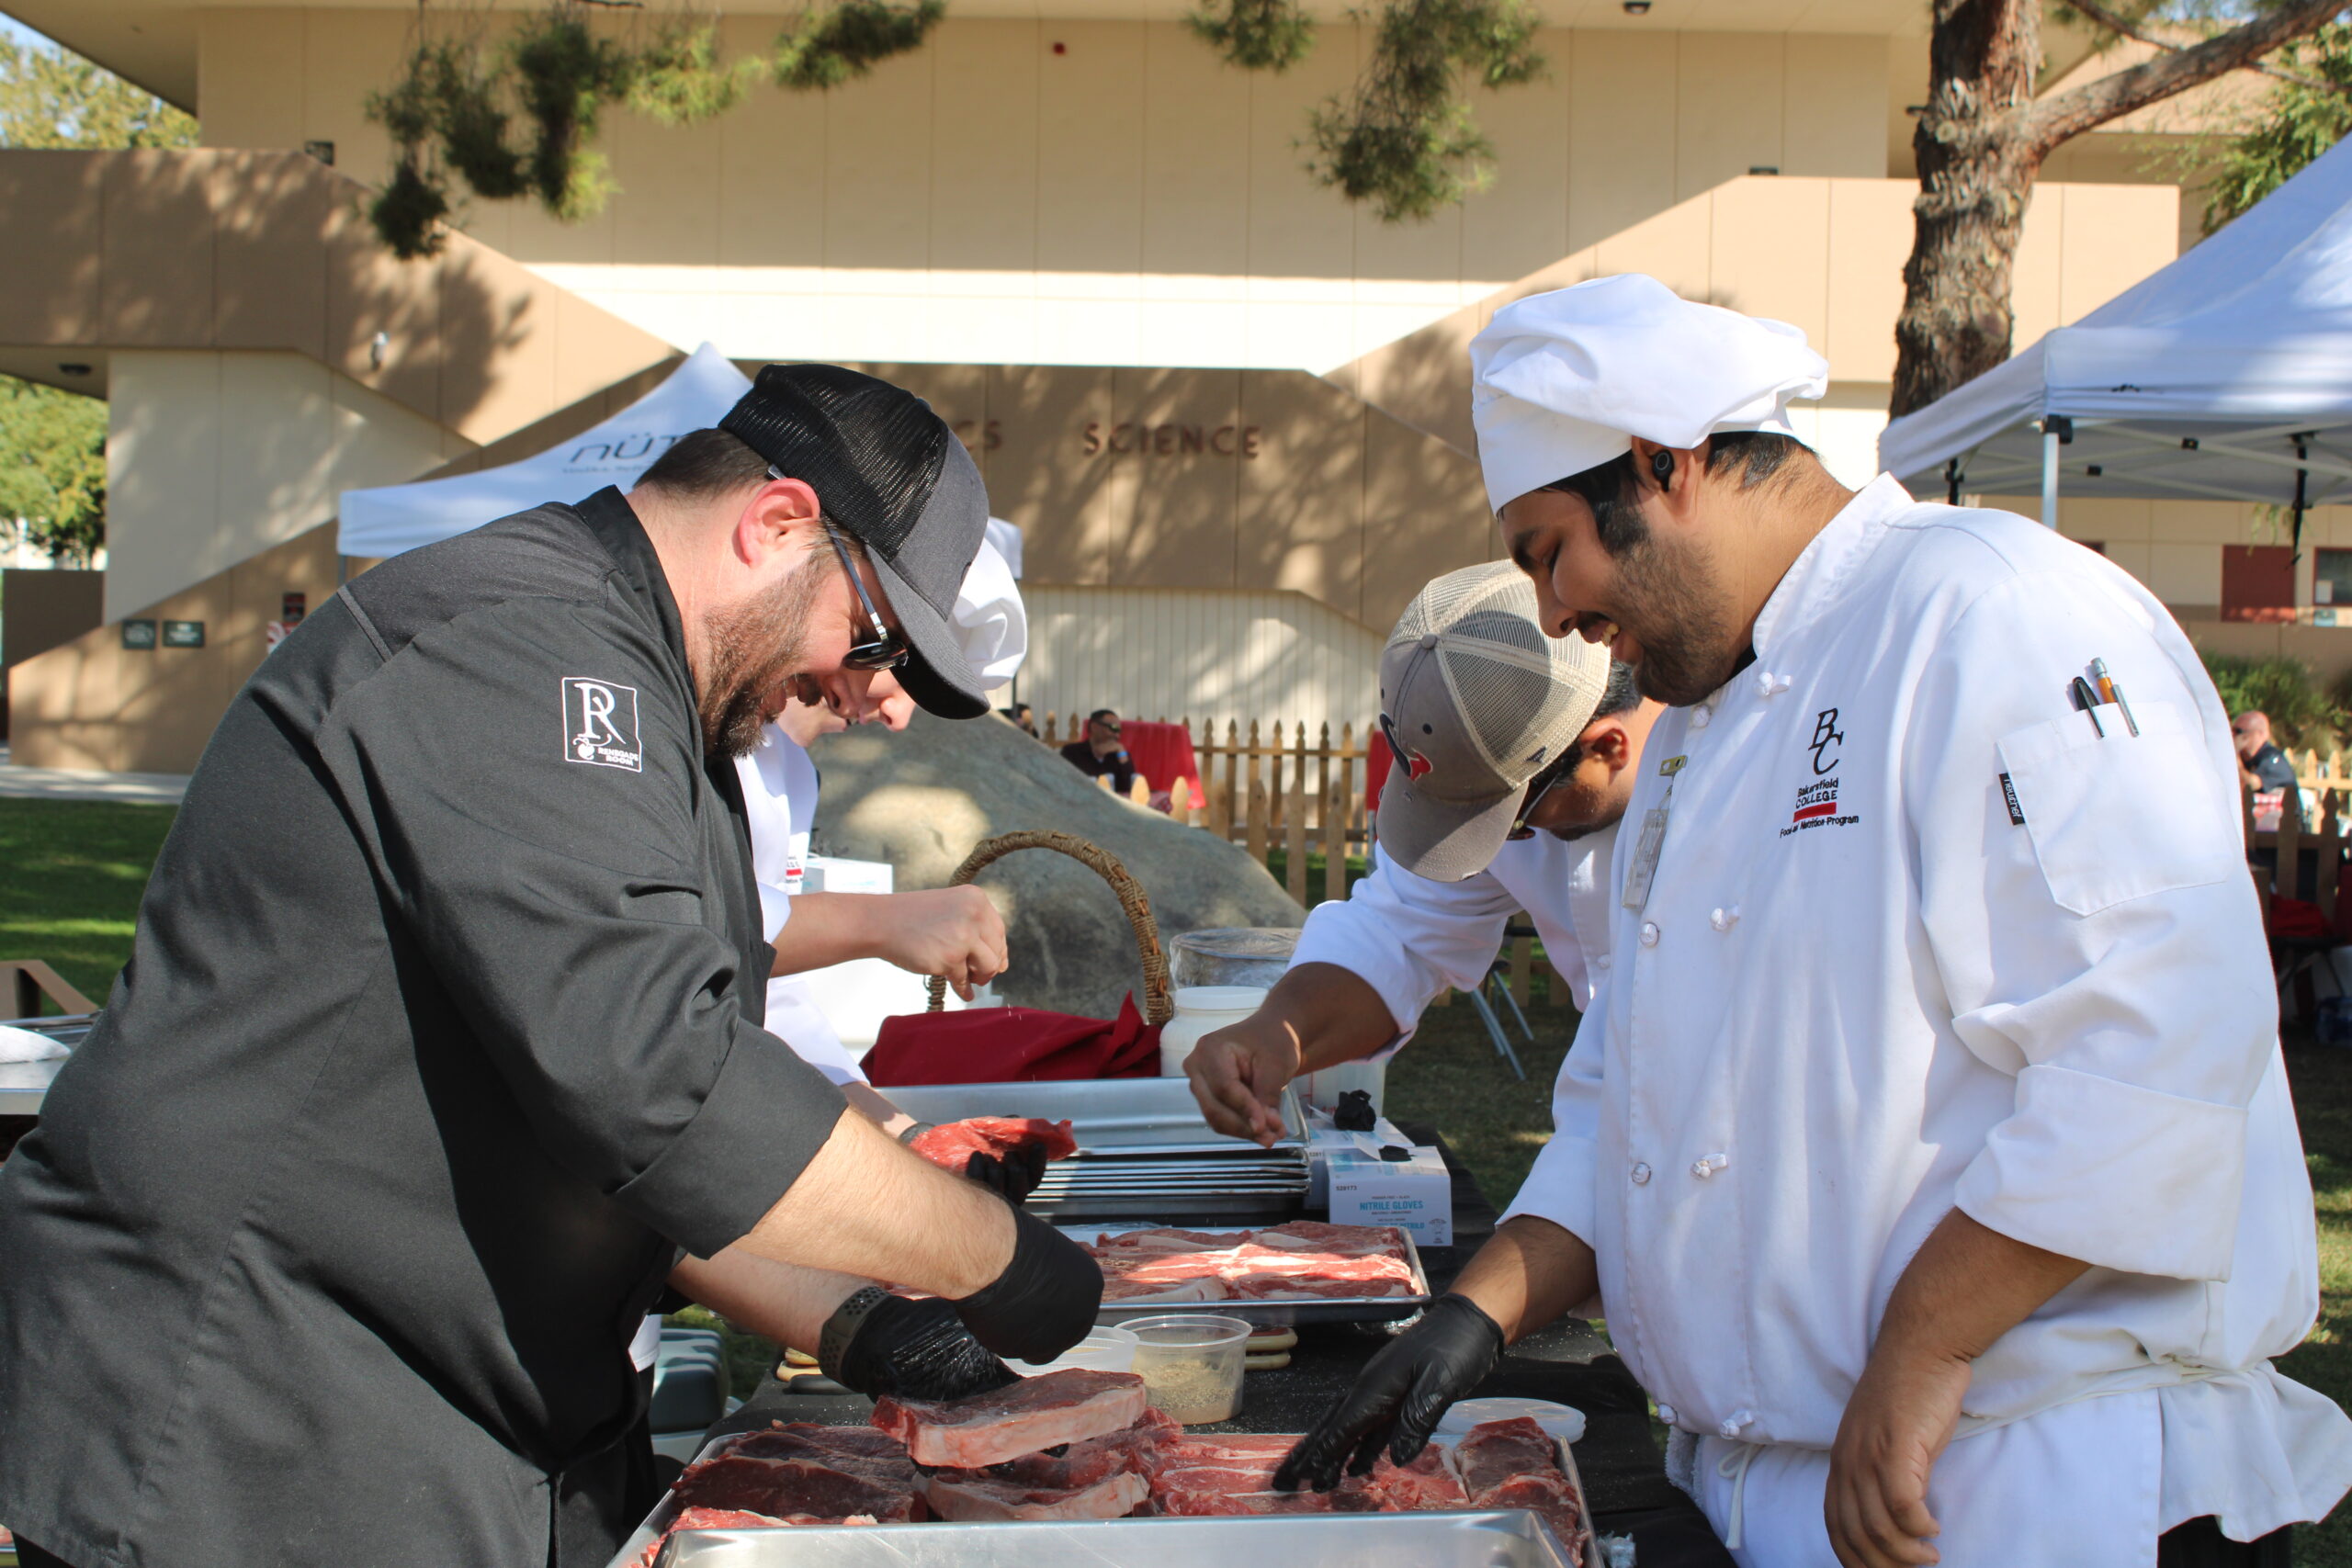 BC Culinary team preparing steaks and hot dogs